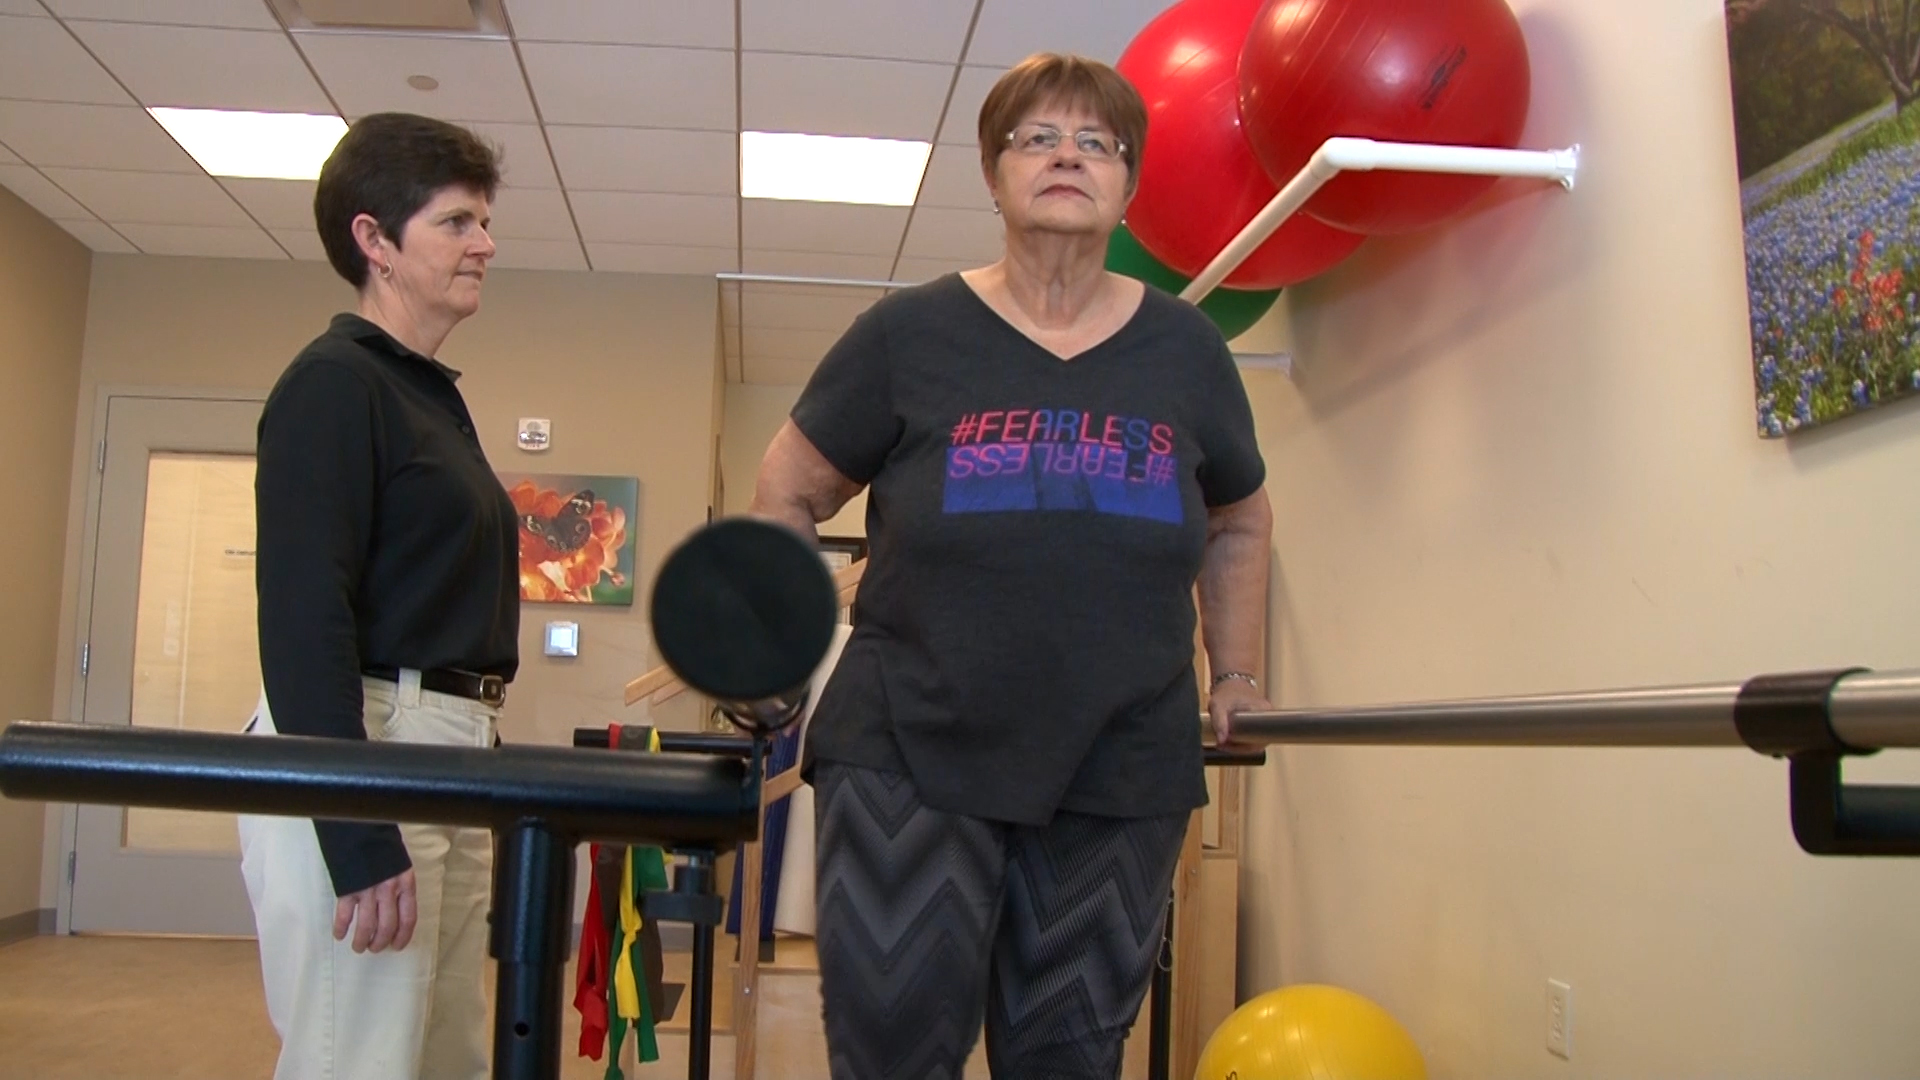 Cancer survivor working with physical therapist